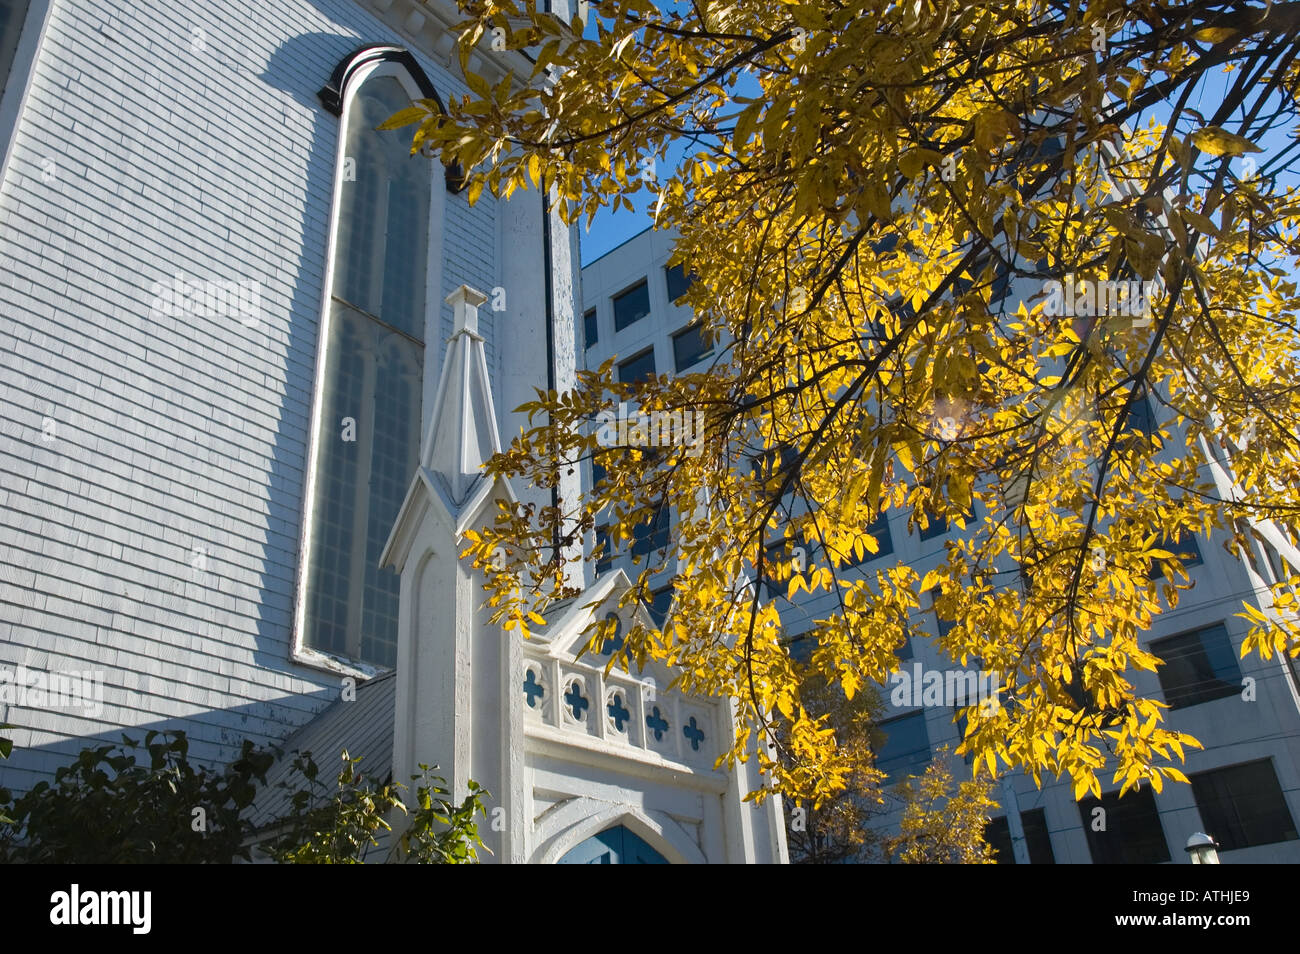 White wooden church with yellow leaves of fall framing it Fredericton New Brunswick Canada Stock Photo